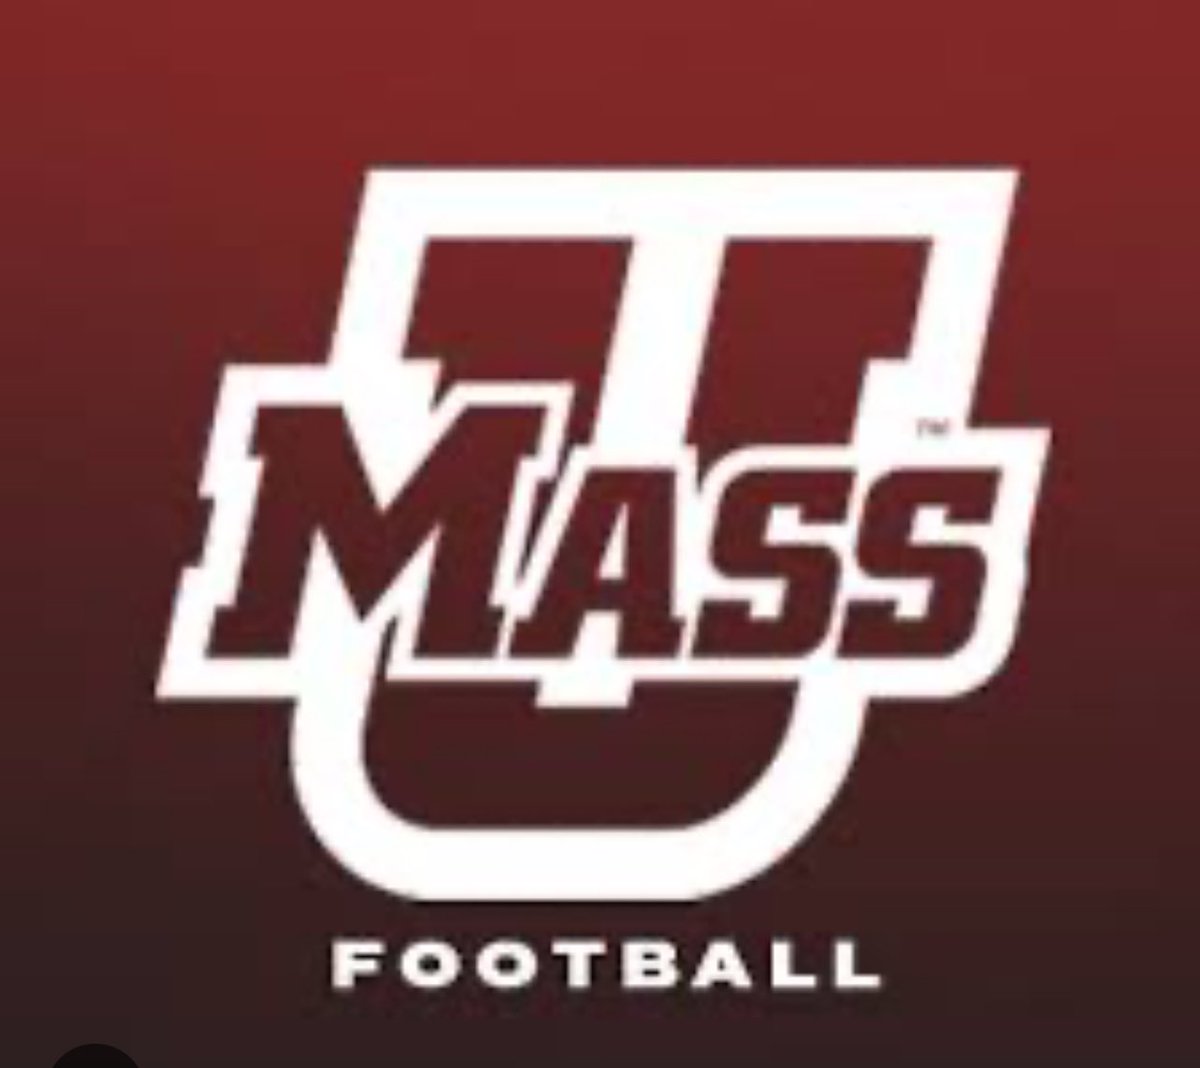 Thankful to receive a Division I offer from UMass!! @Coach_Mince54 @CoAcHKeLZZz3 @libbieguy @DBP_Football @RivalsFriedman @On3Recruits @MohrRecruiting